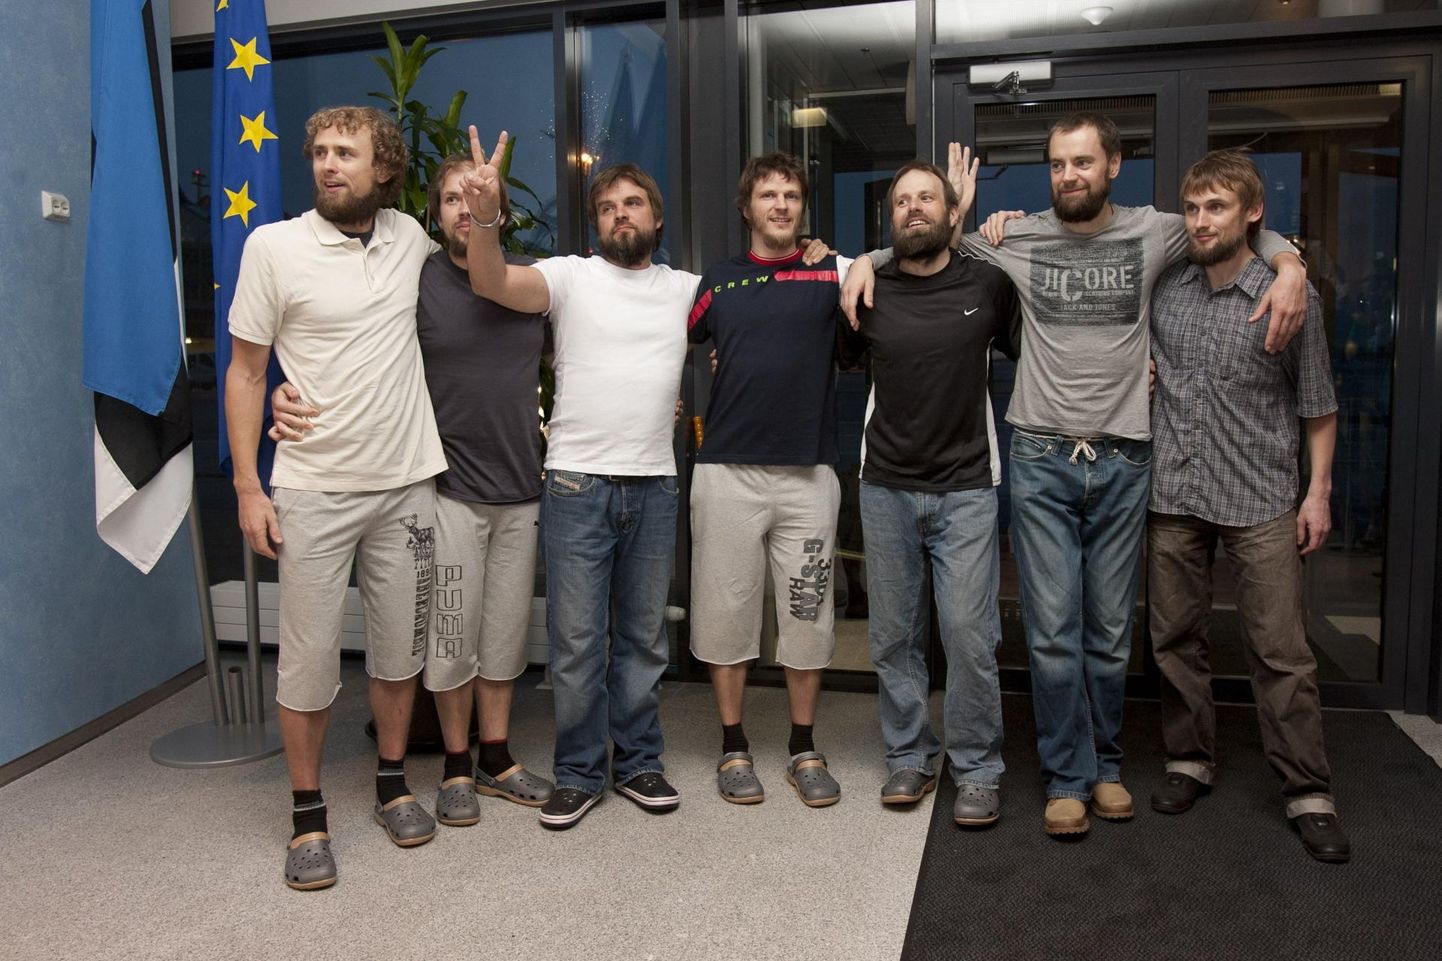 The men arrived in Tallinn in early morning of July 15, 2011 on a private Estonian Air flight. 